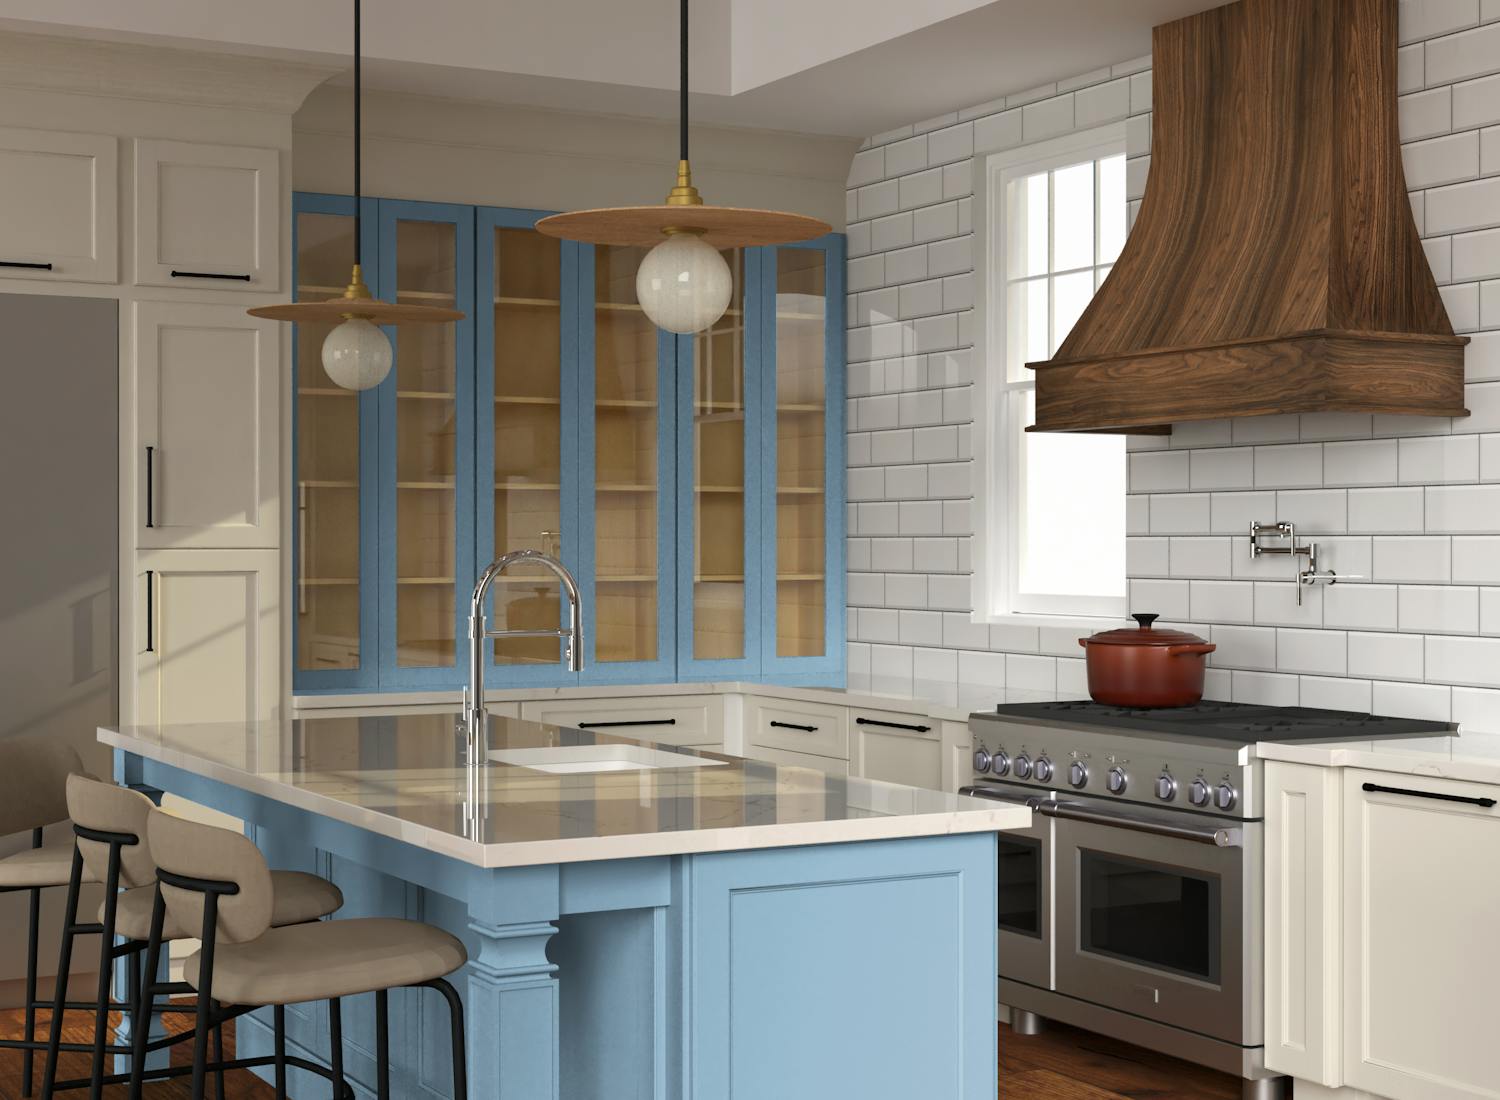 https://images.prismic.io/fabuwoodtest/cdc5f2c3-5574-45e6-ad30-9be749f5ab60_artisan+walnut+hood+kitchen+-+ocean+blue.png?auto=compress,format&rect=239,0,2727,2000&w=1500&h=1100